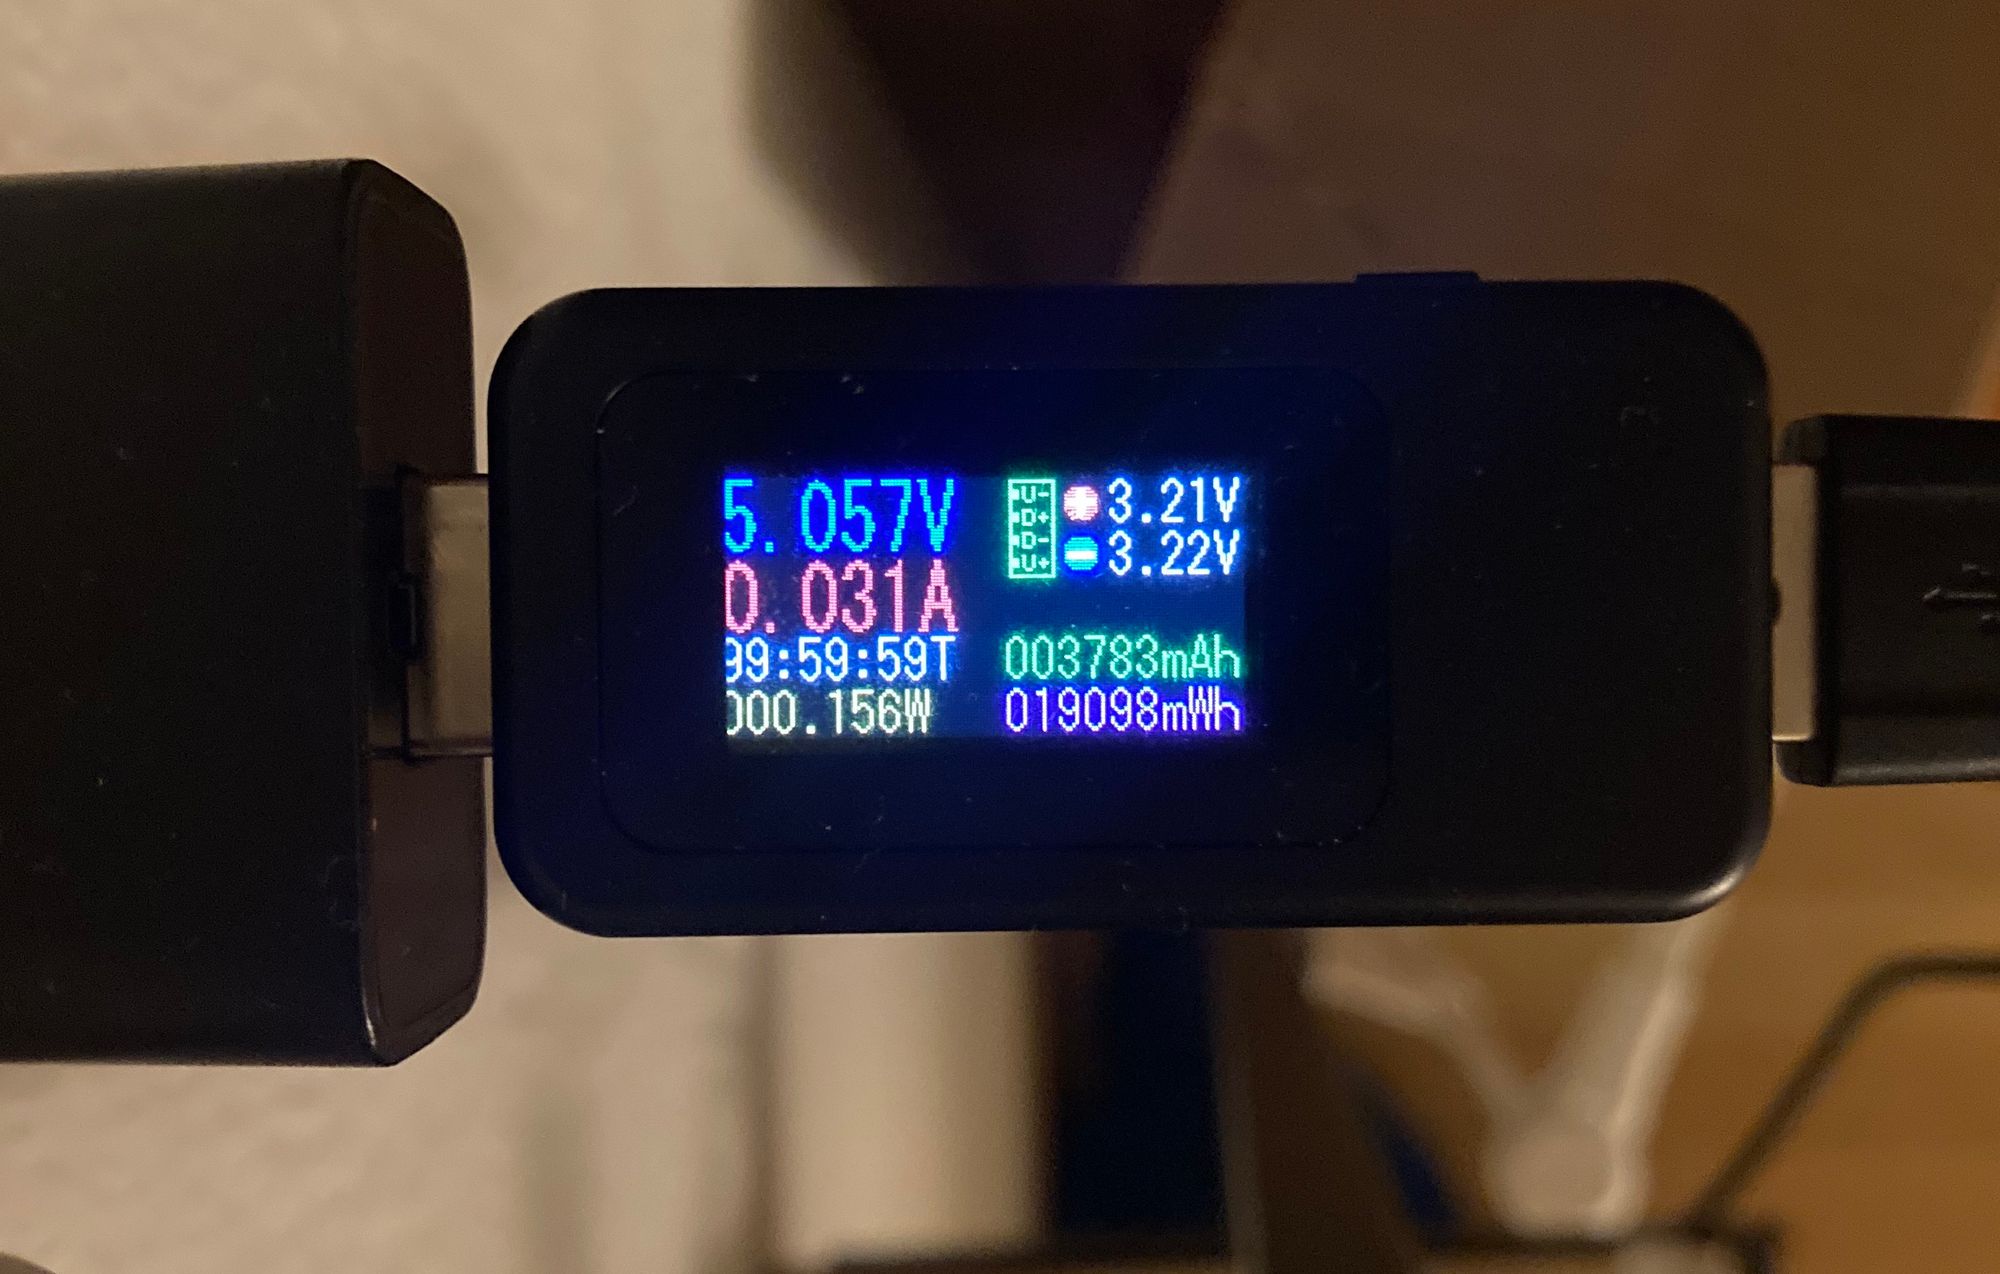 0.15W used during idle as measured on the USB power supply.